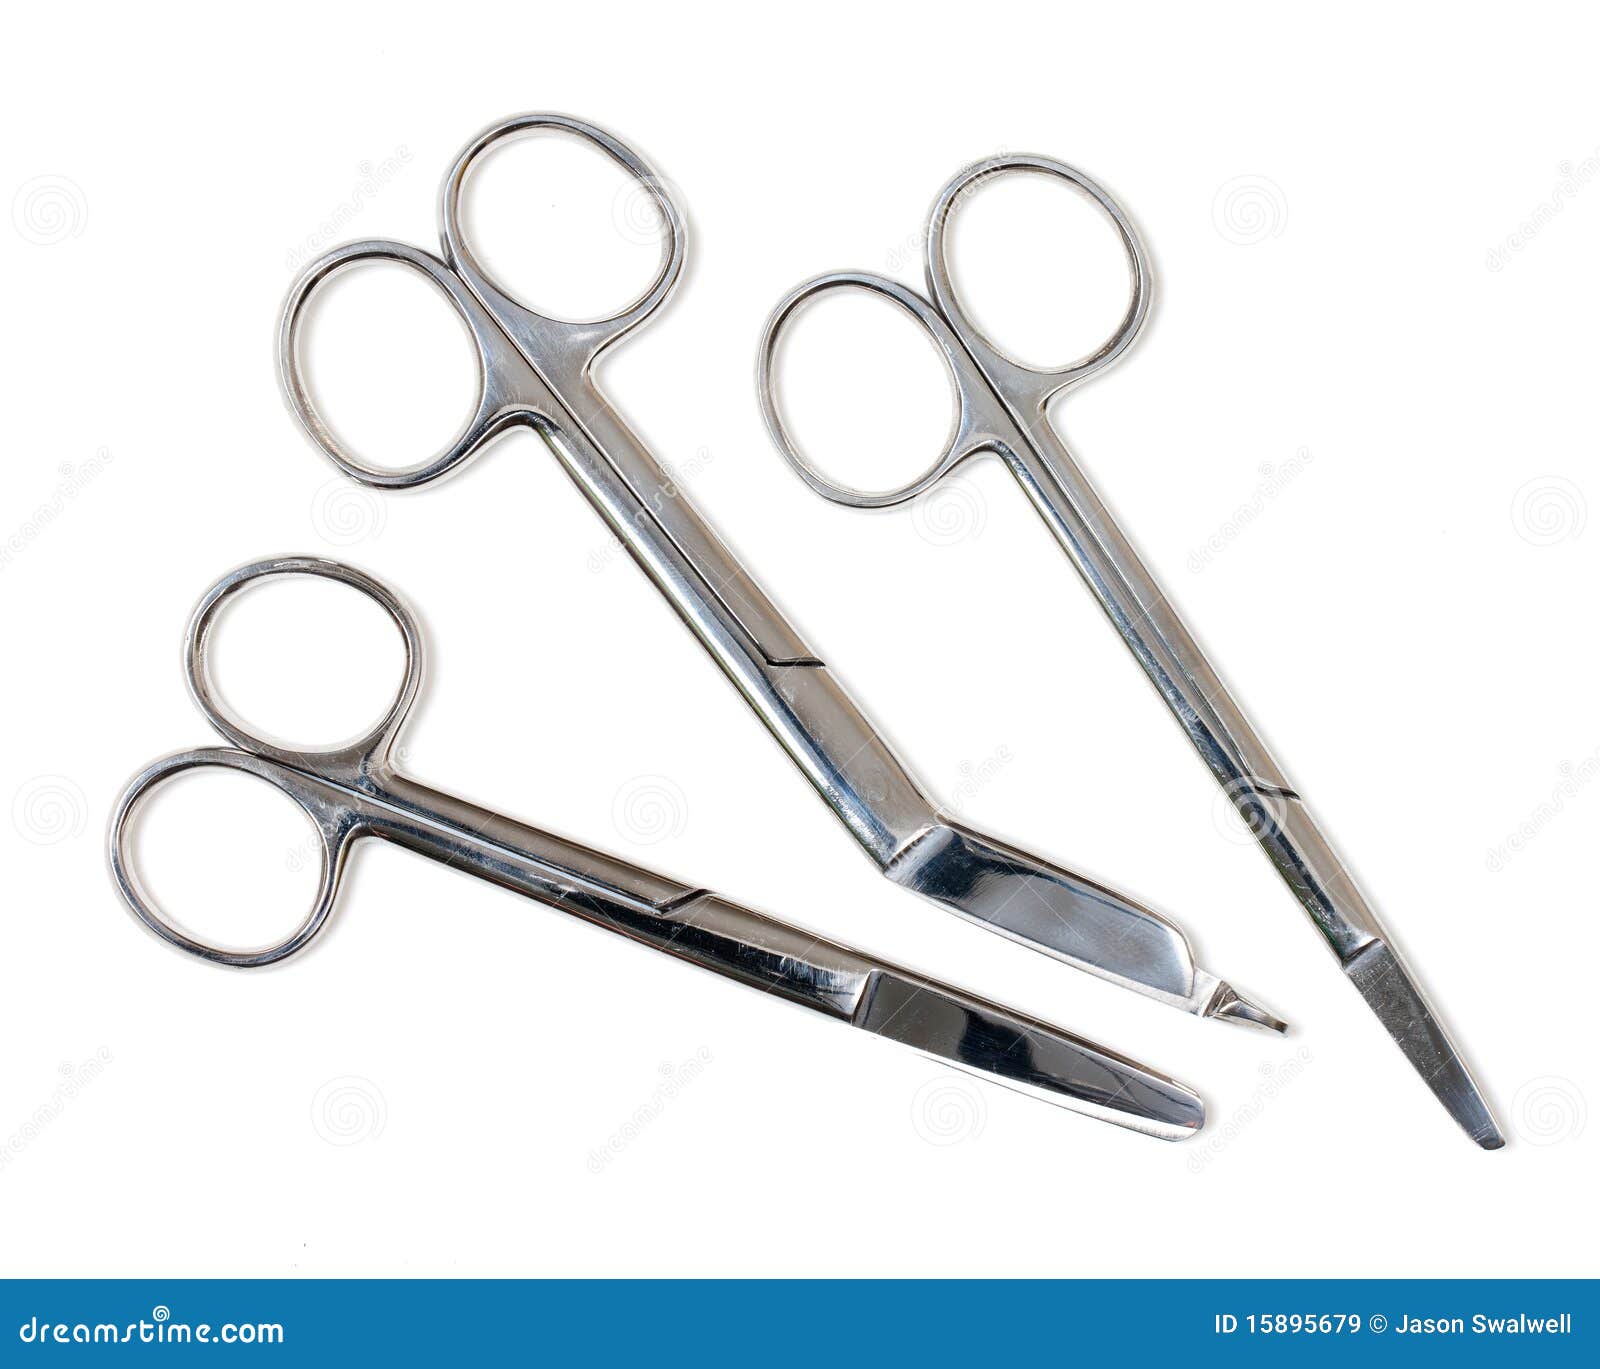 Set Of Three Surgical Scissors Royalty Free Stock Images - Image: 15895679